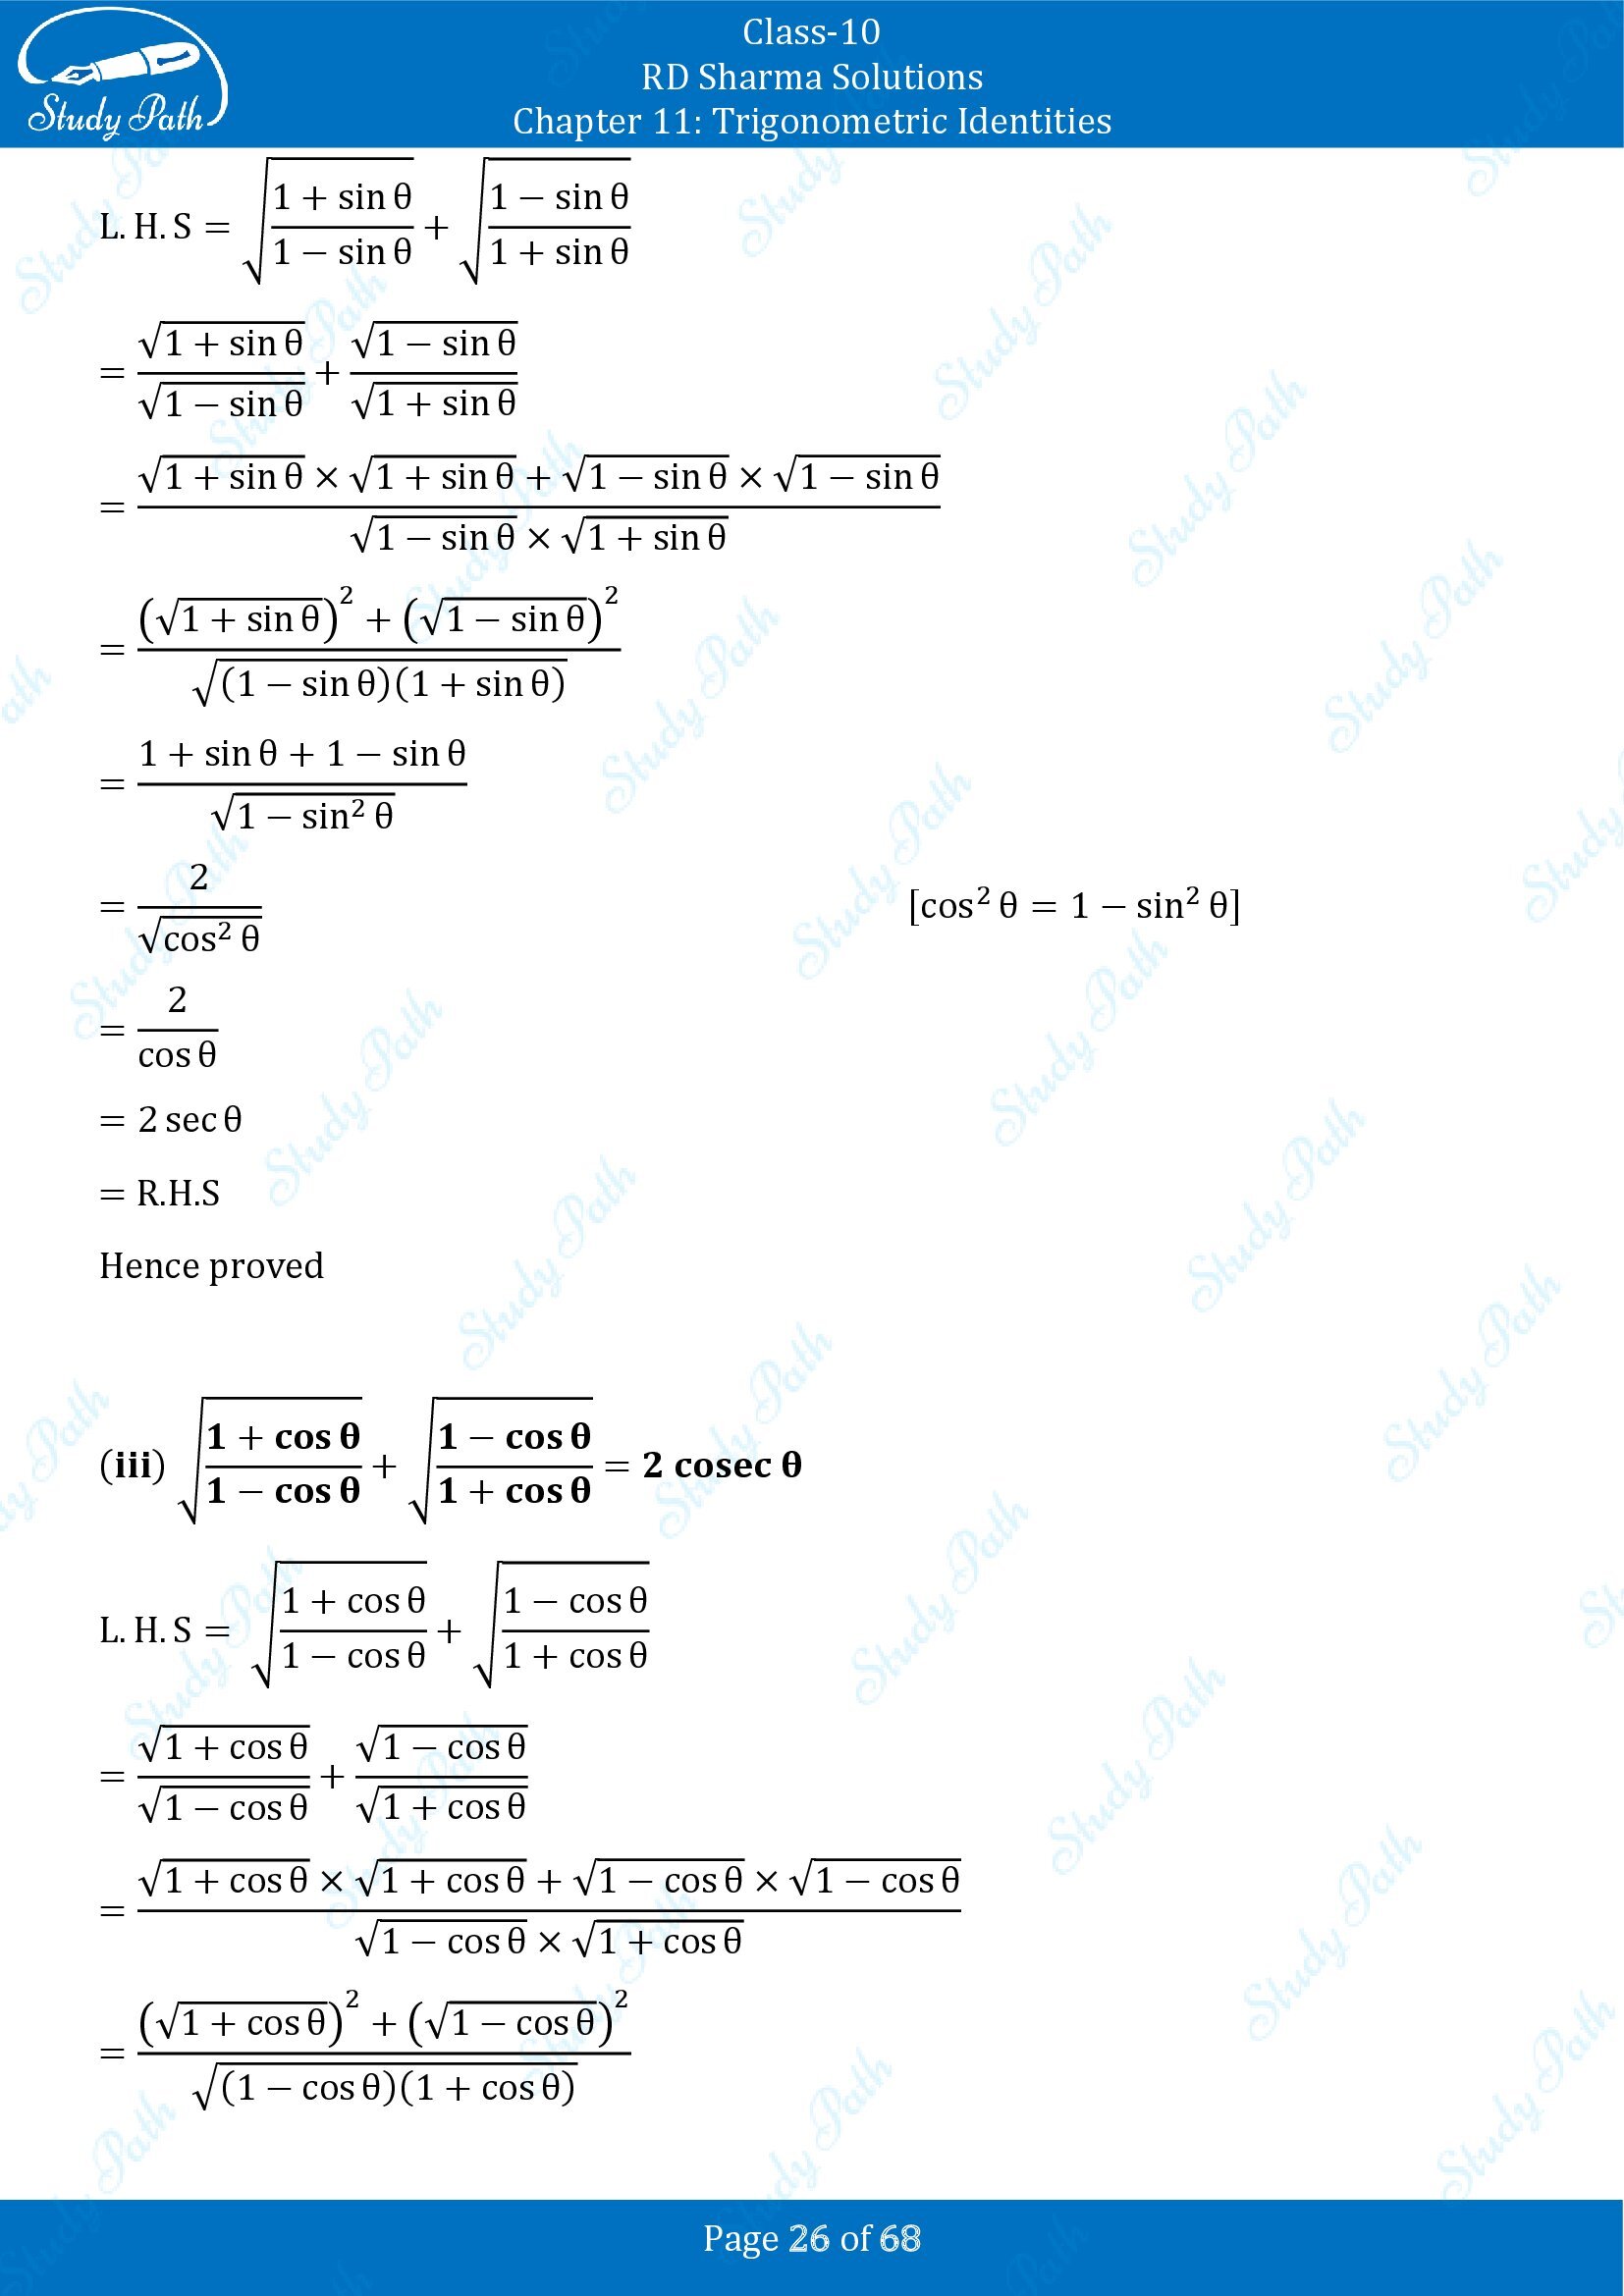 RD Sharma Solutions Class 10 Chapter 11 Trigonometric Identities Exercise 11.1 00026